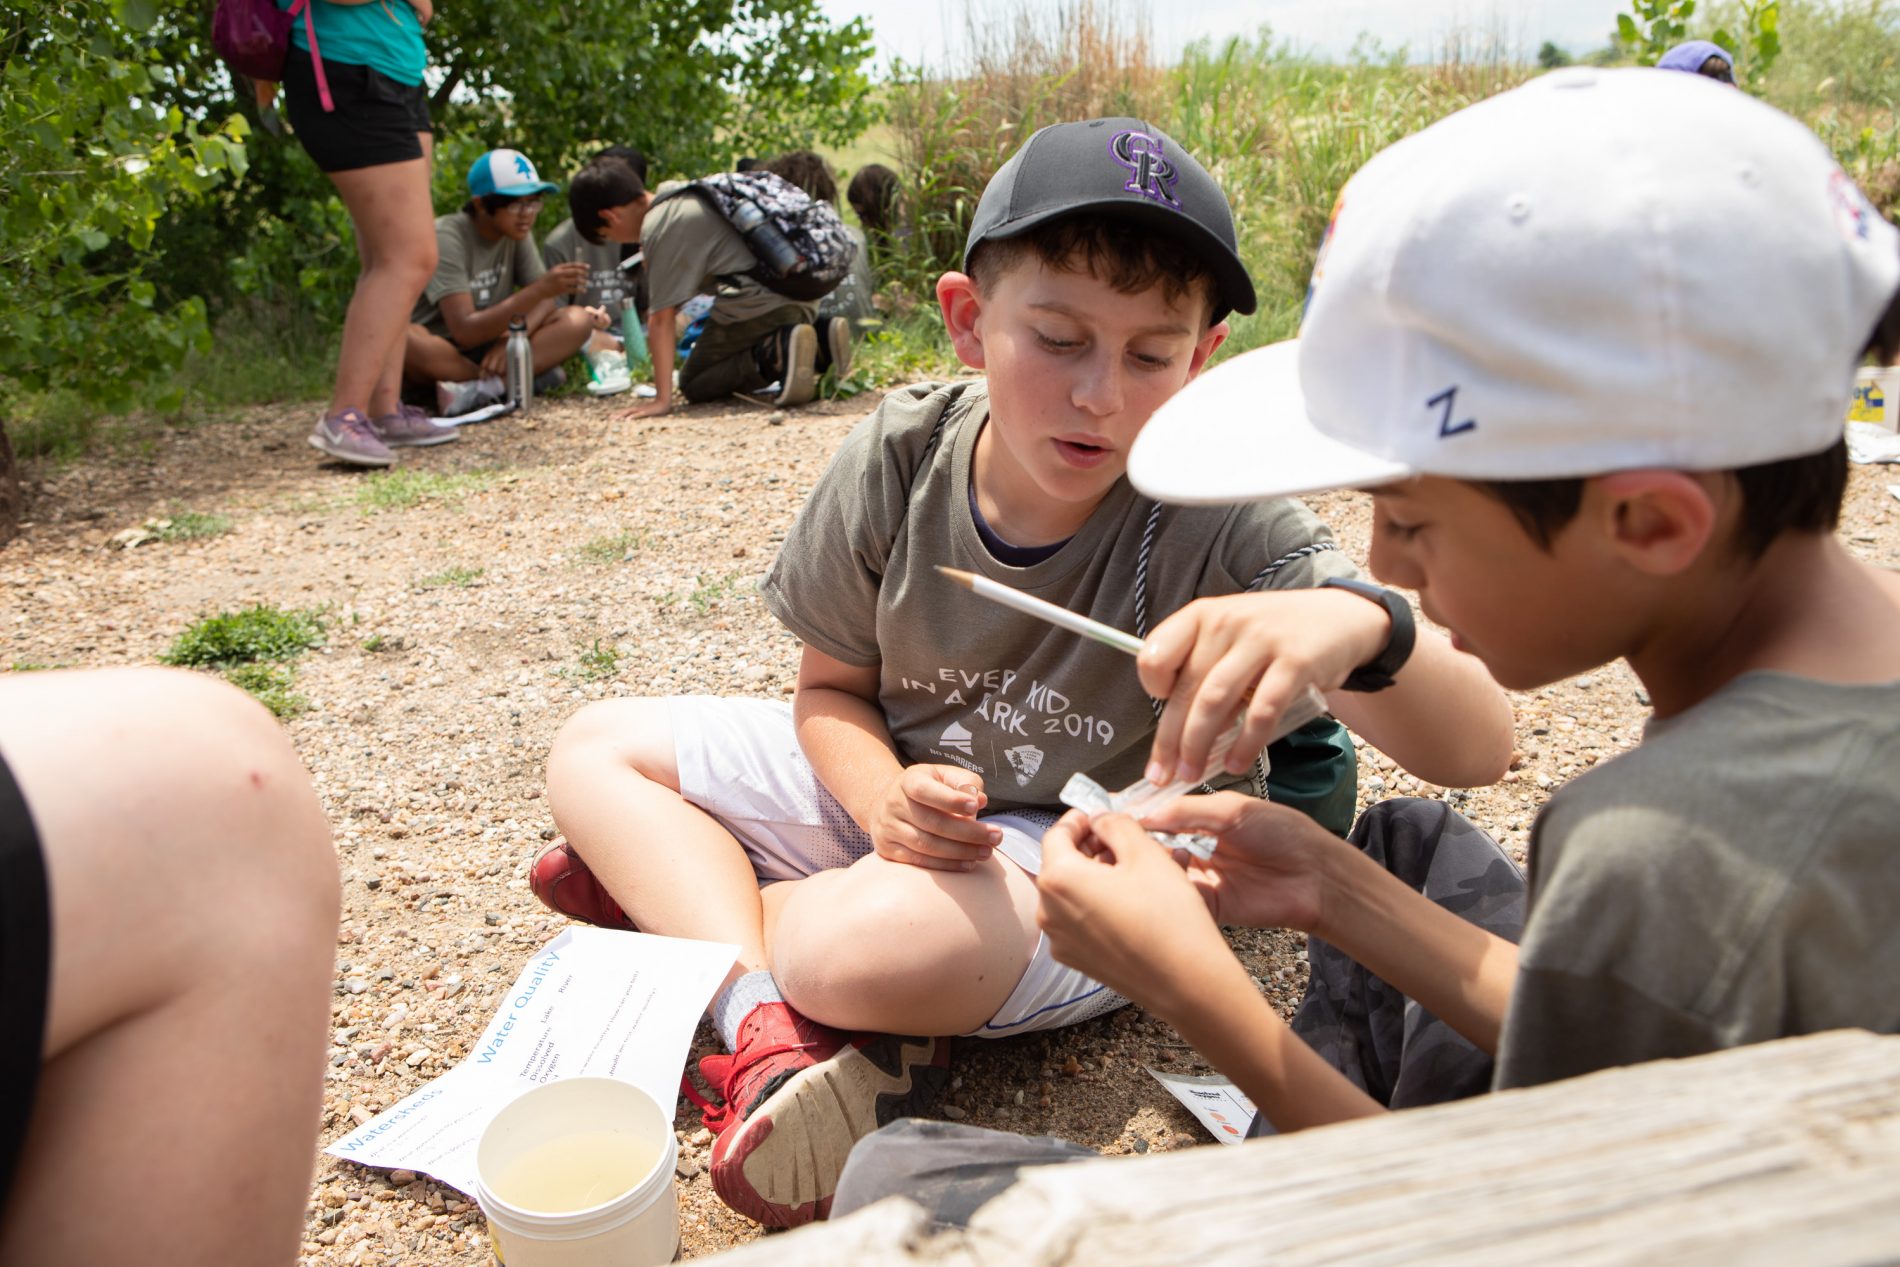 Field Trip Scholarships Still Available for K-12 Classes to Visit CALA